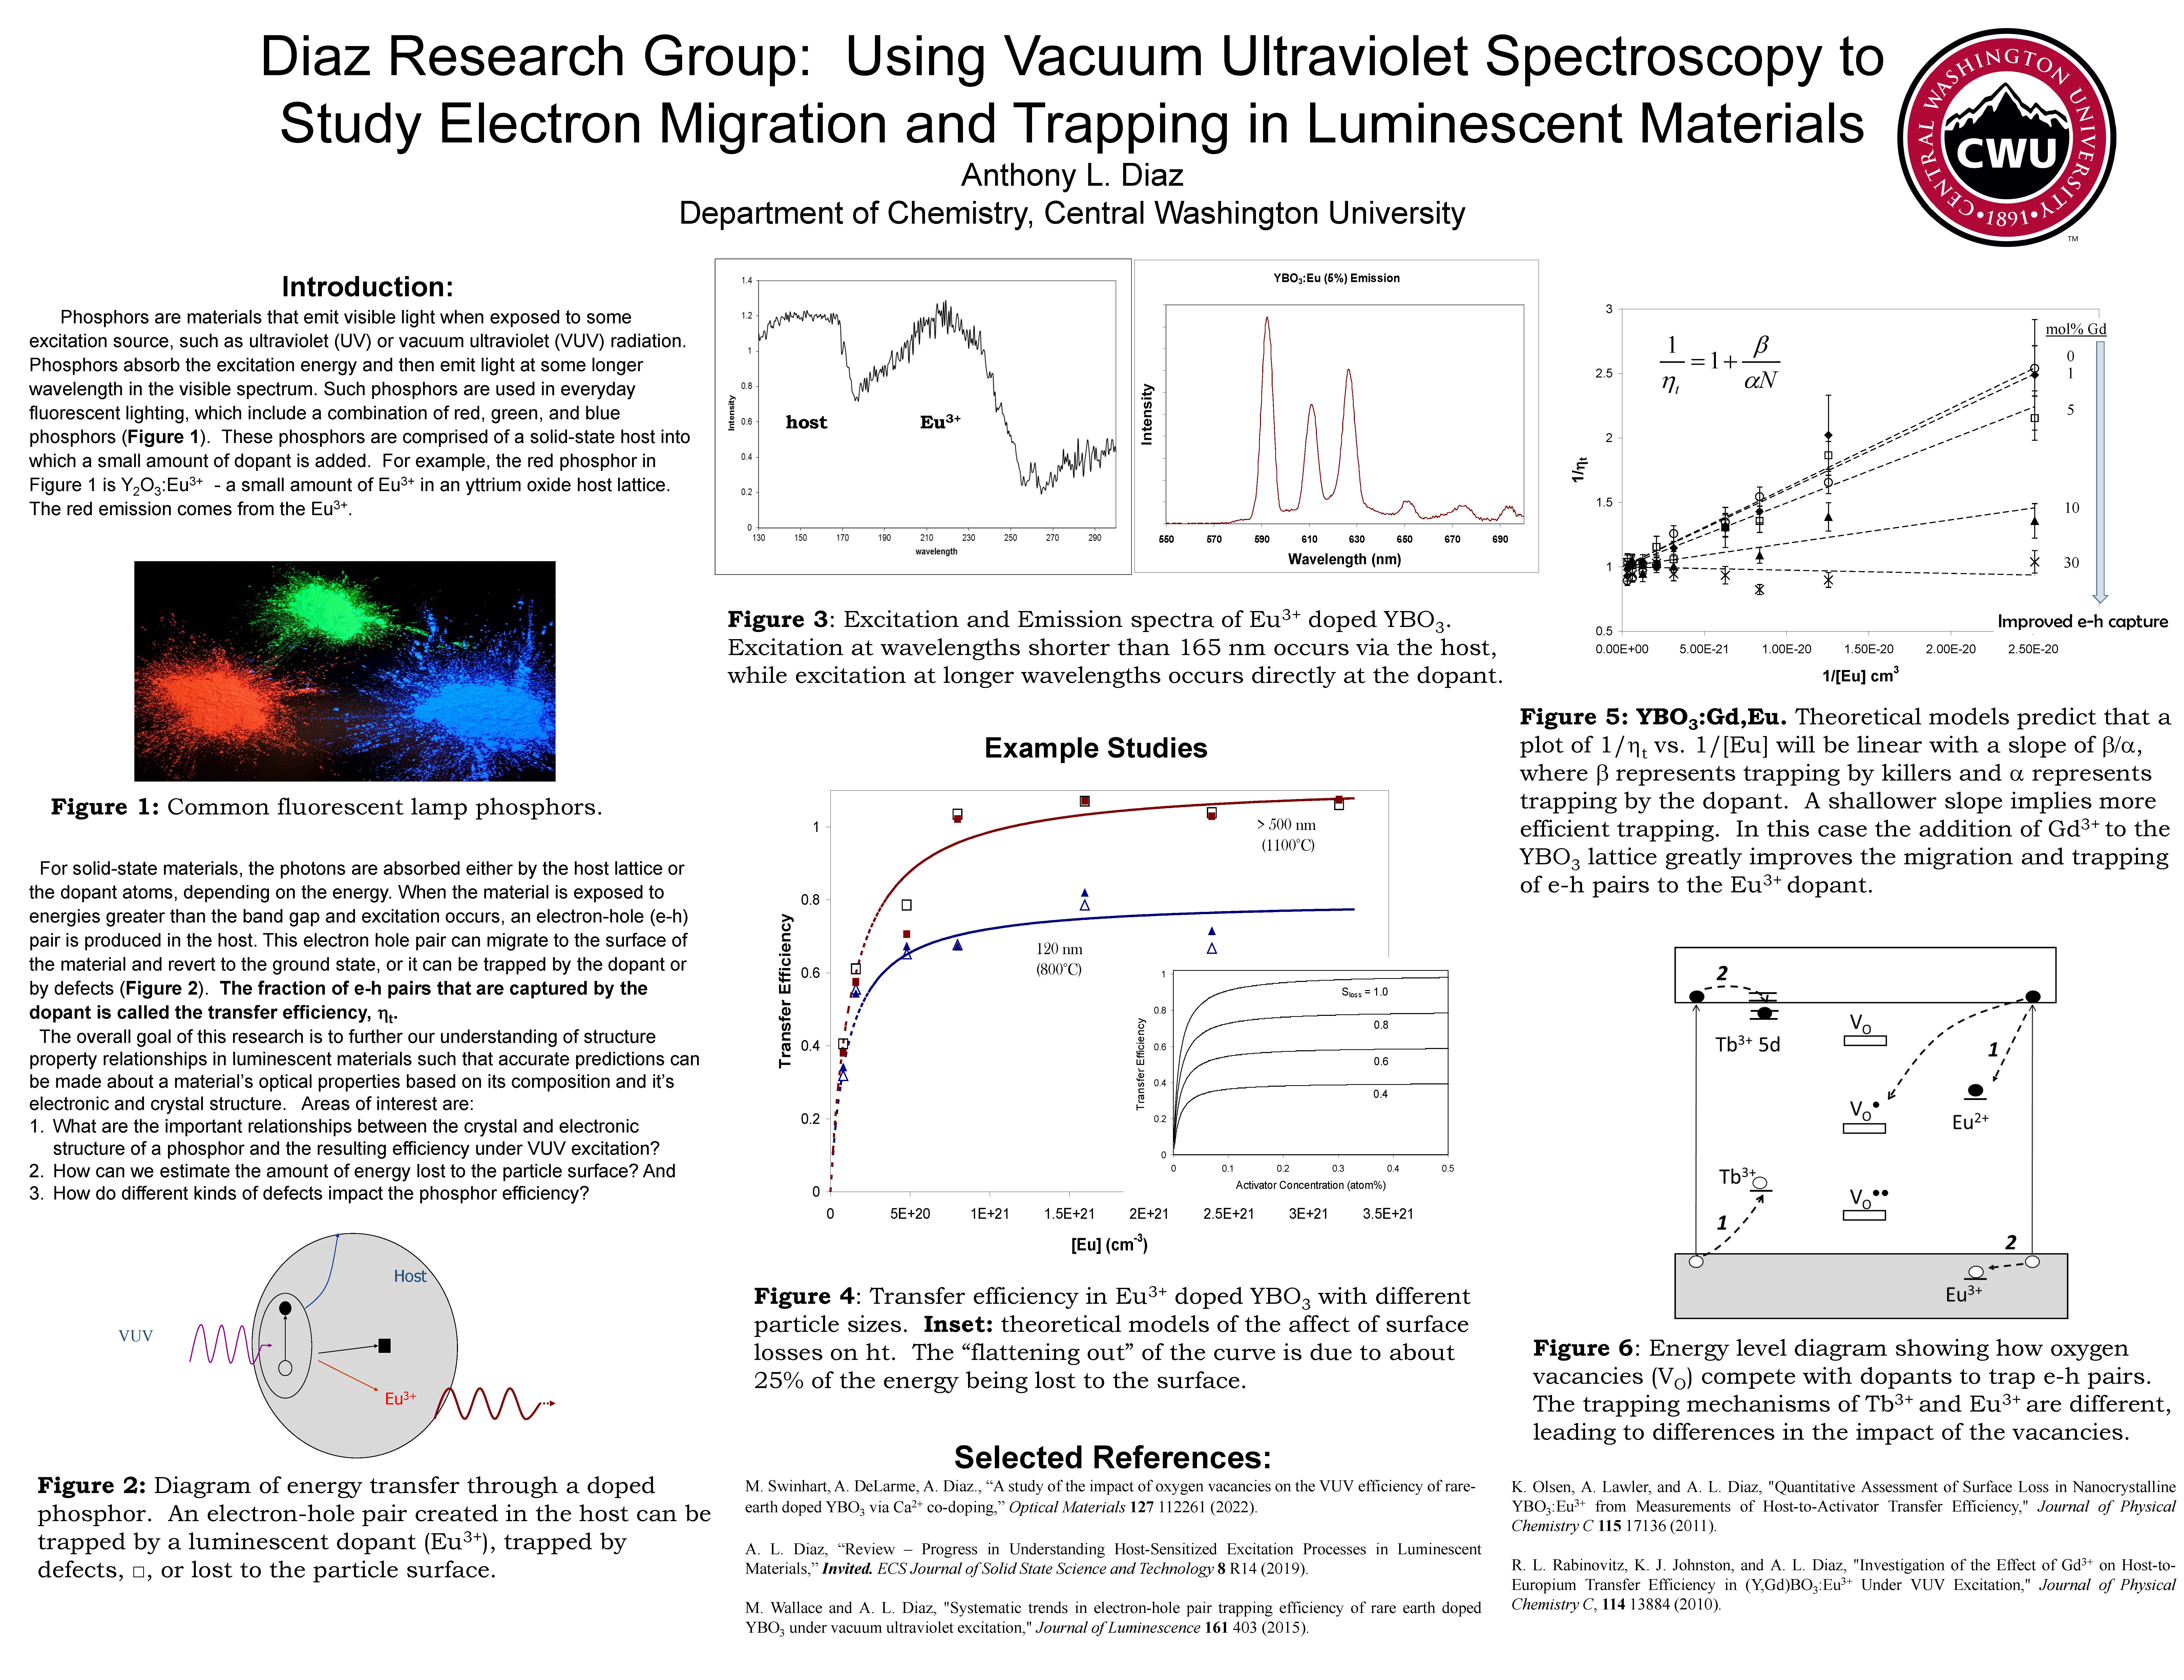 Poster detailing Diaz Research group detailing area of study